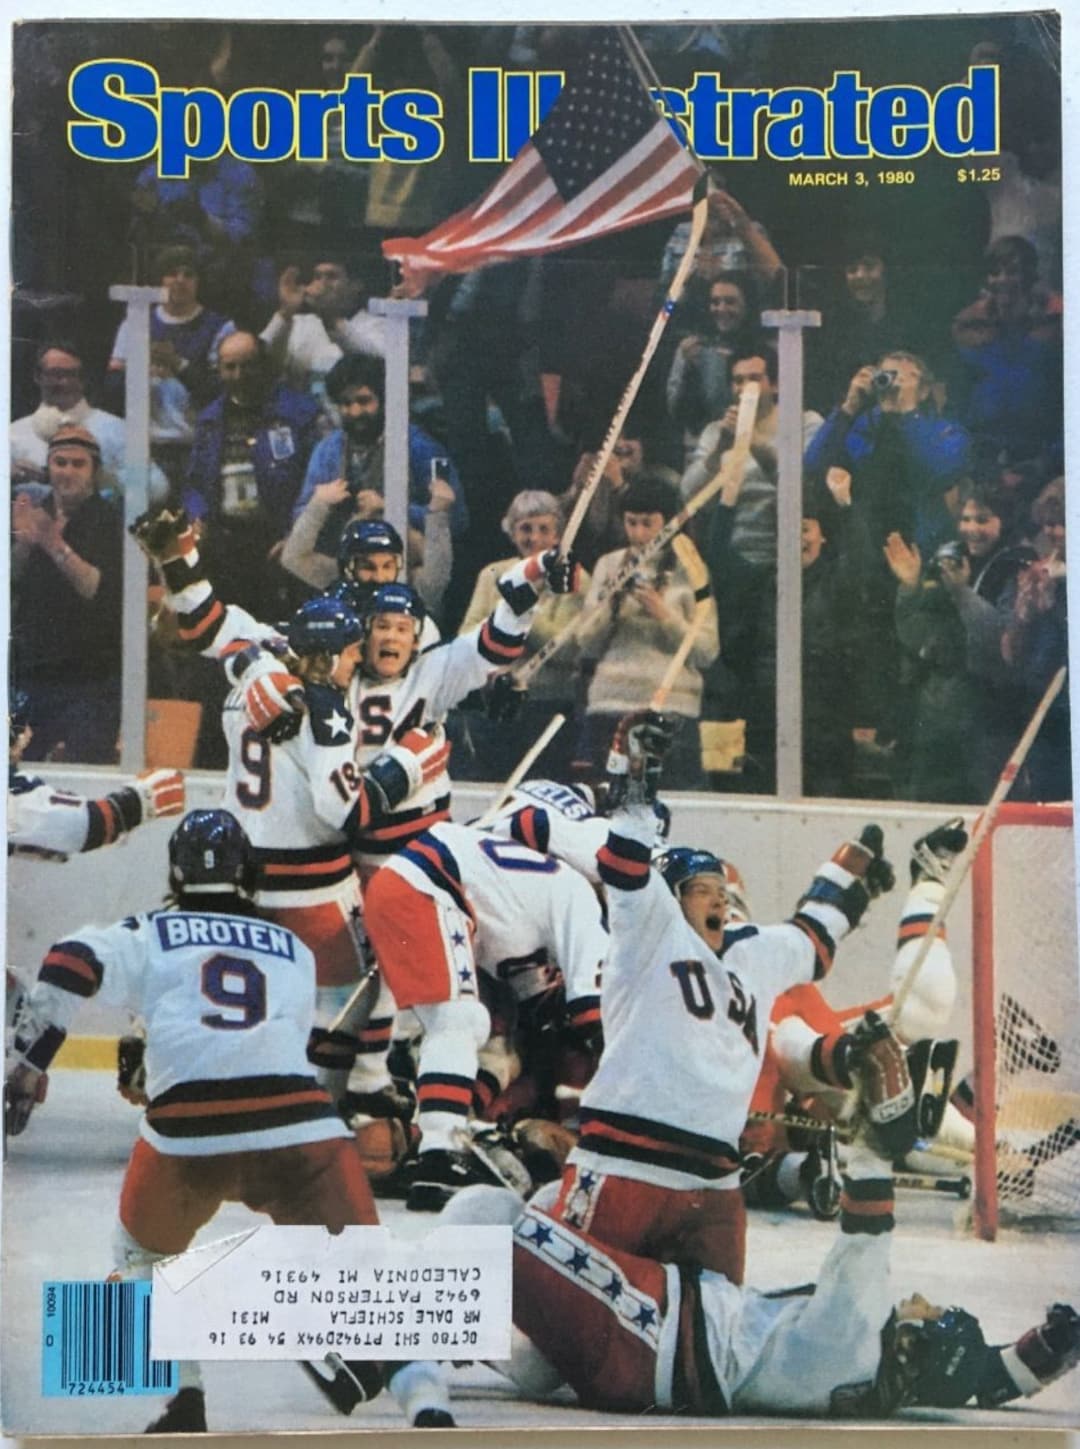 The 'Miracle on Ice' U.S. hockey team inspired me to a gold medal